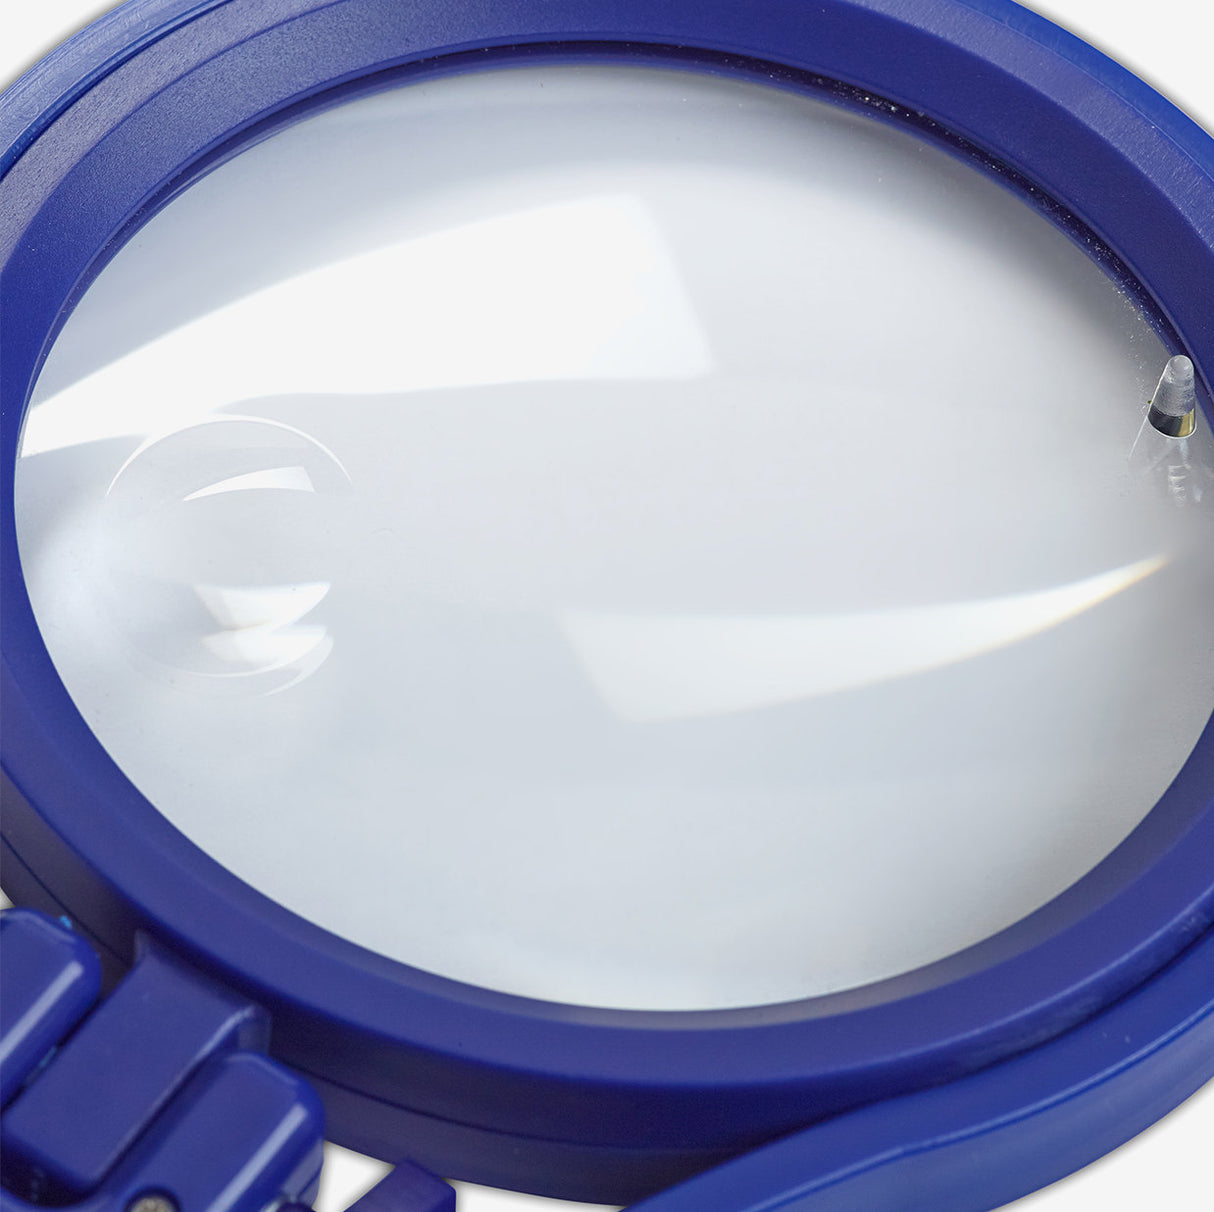 Universal Magnifying Glass with Rotating Lens 10.5 cm by Prym 611730 - Clear Vision and Hands-Free for Your Projects